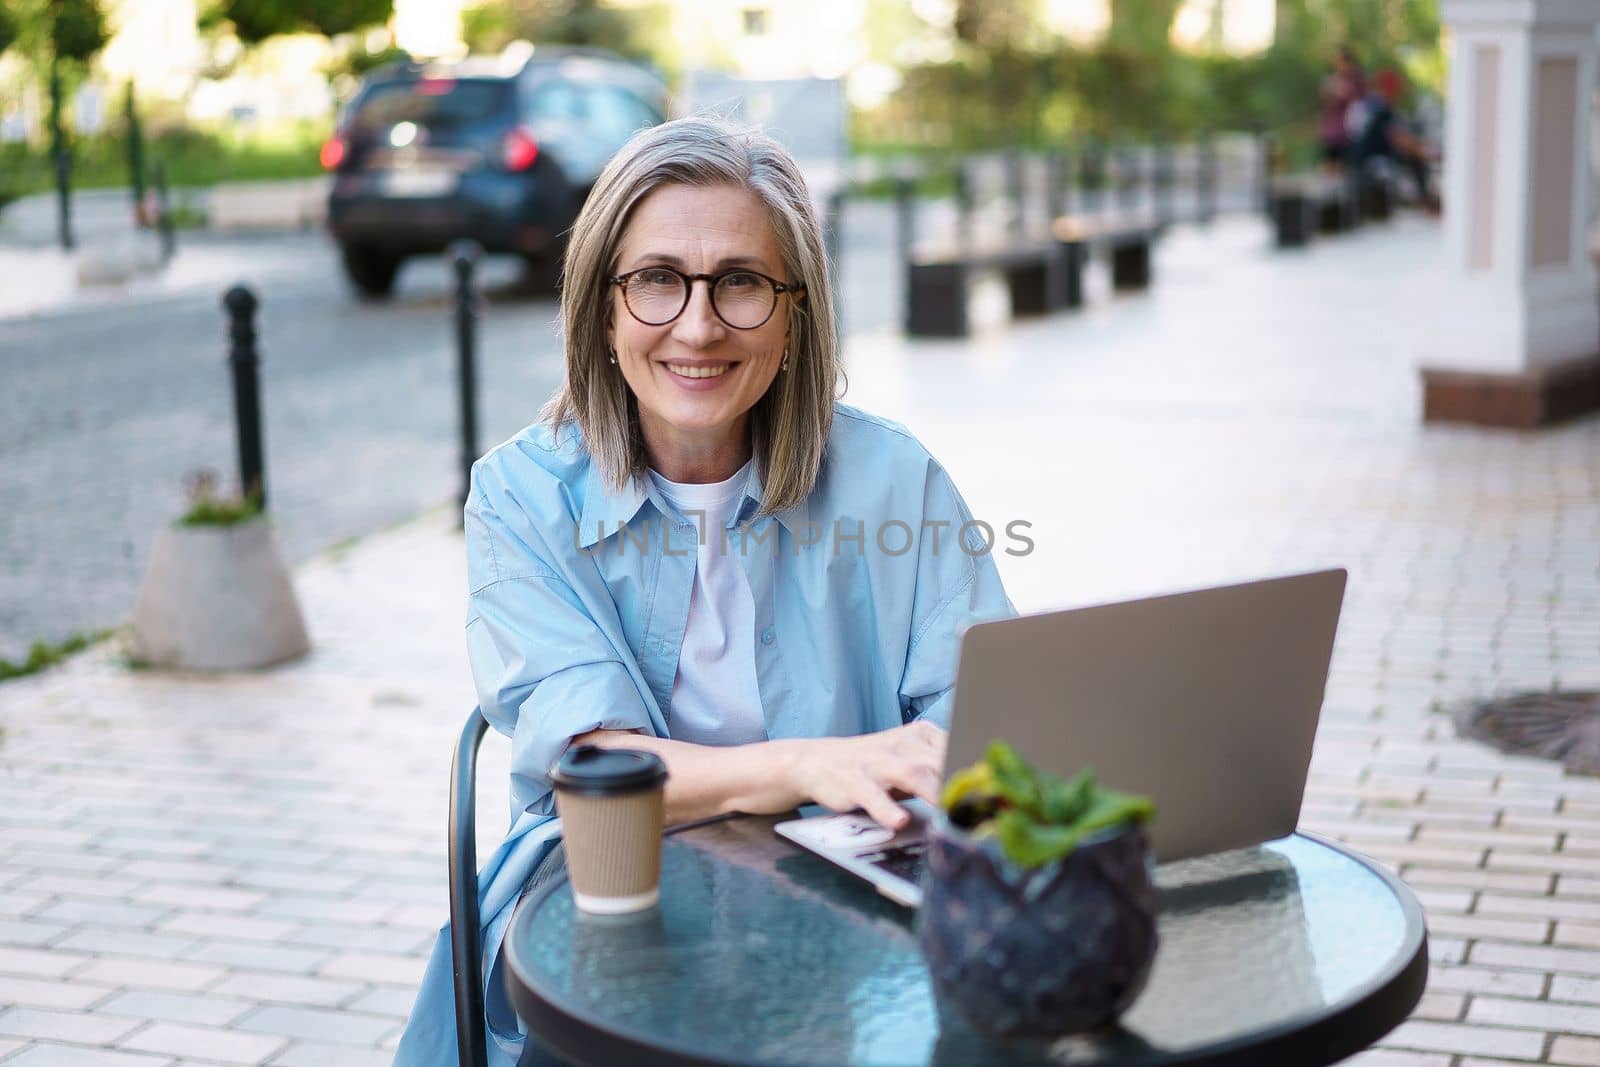 Happy and content Caucasian mature woman with long grey hair, seated at a street cafe with a notebook. She appears relaxed and enjoying her leisure time while staying connected with the world through the convenience of technology.